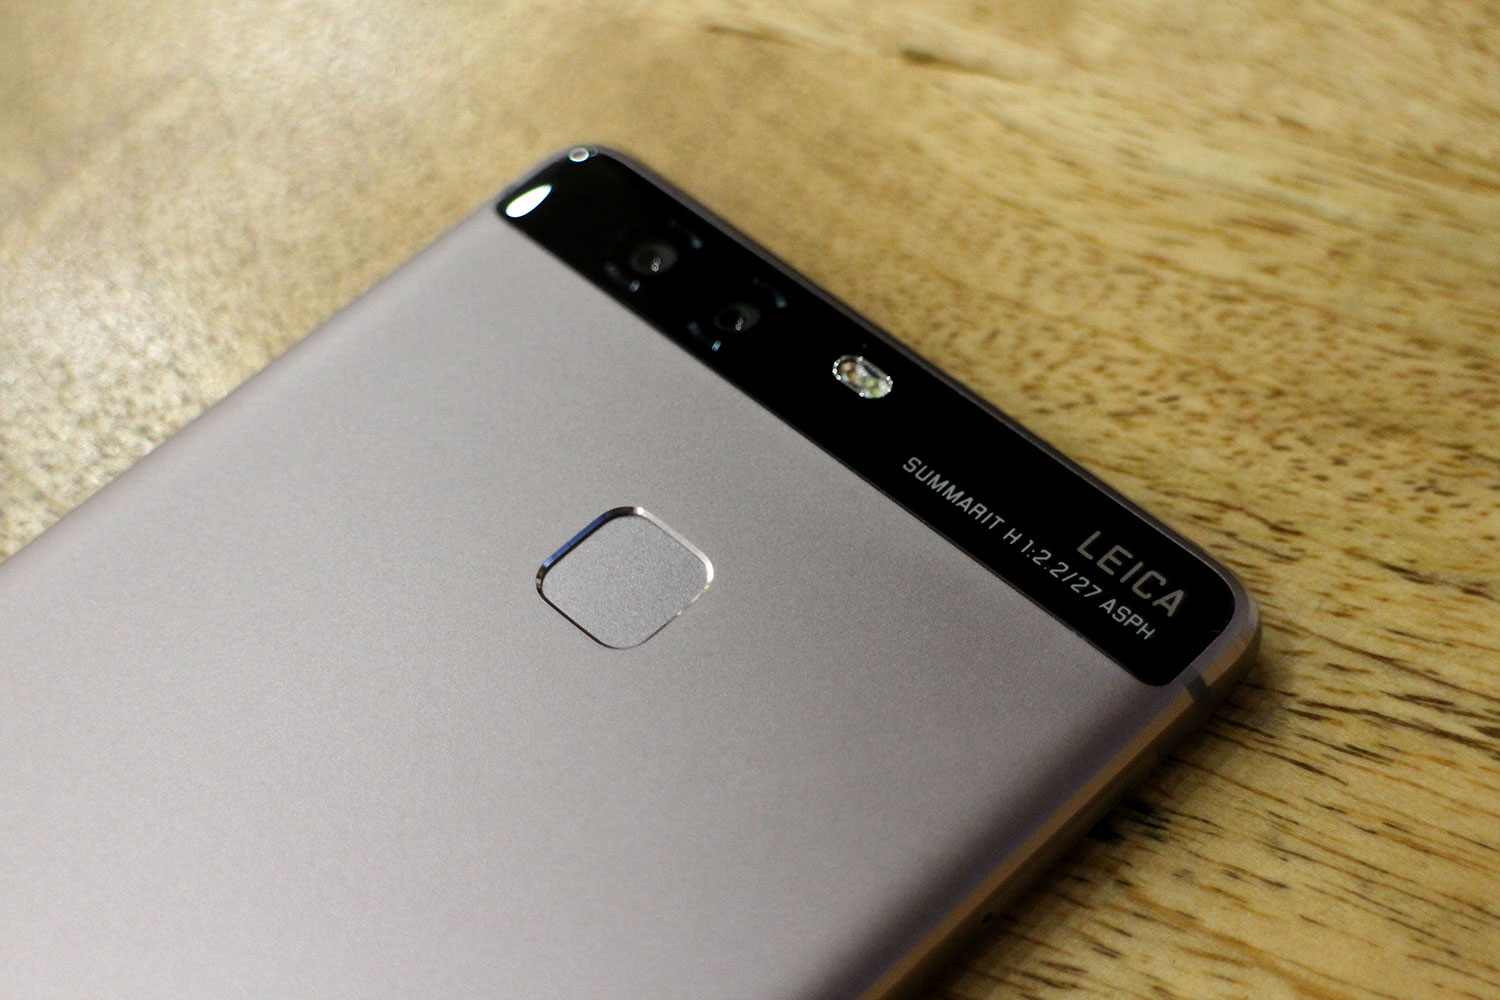 Ik wil niet Christian ijs The 10 Best Huawei P9 Cases and Covers | Digital Trends